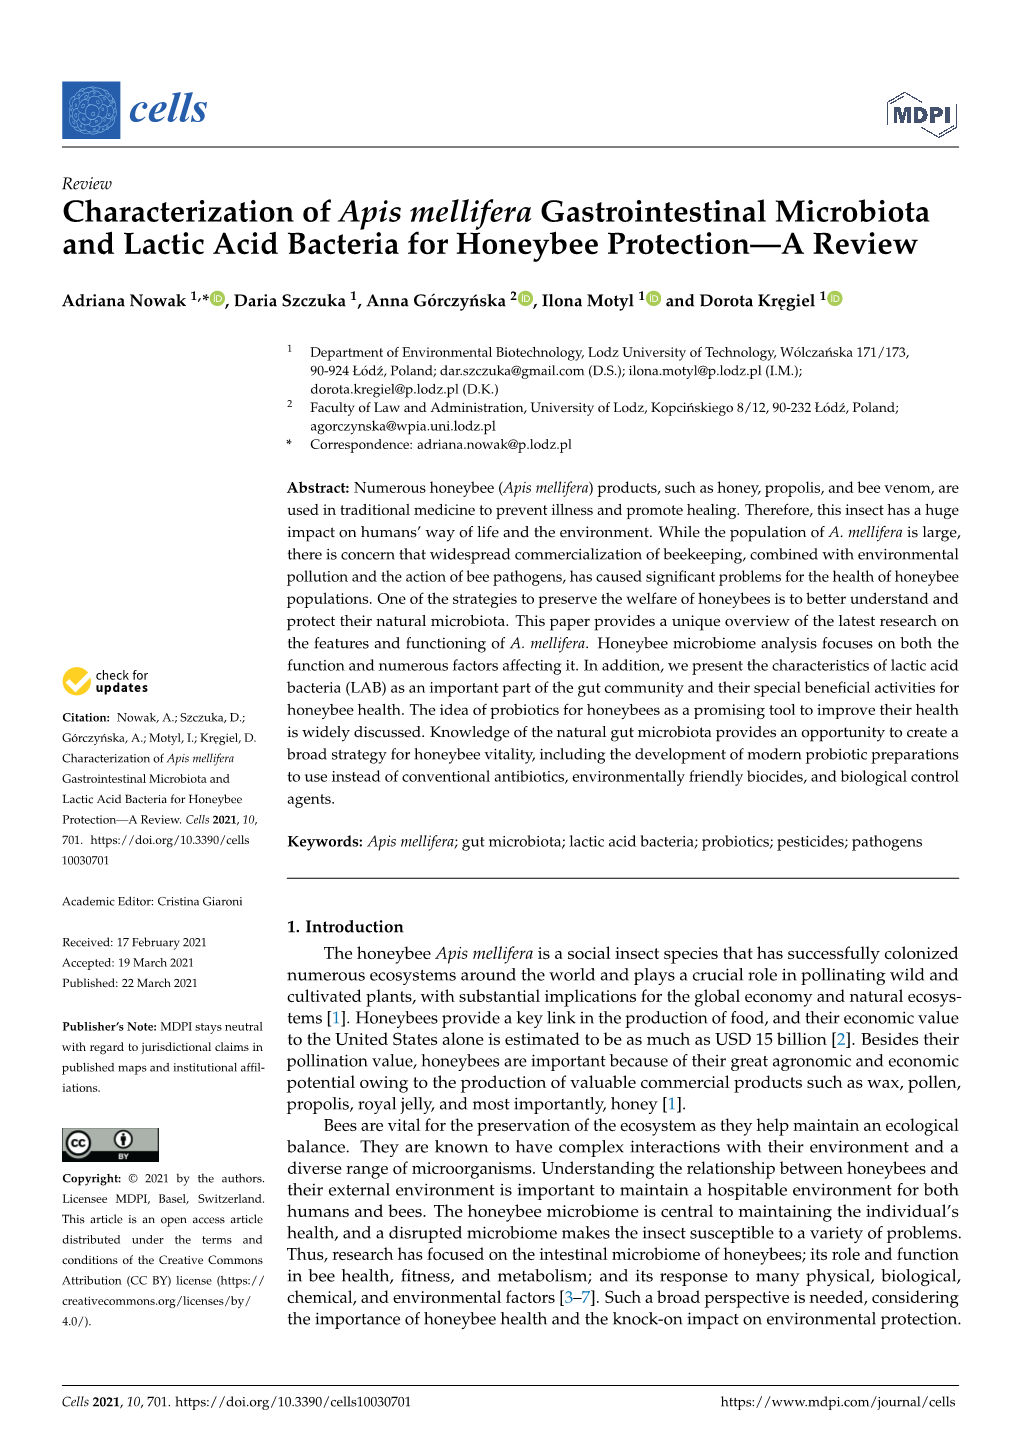 Characterization of Apis Mellifera Gastrointestinal Microbiota and Lactic Acid Bacteria for Honeybee Protection—A Review